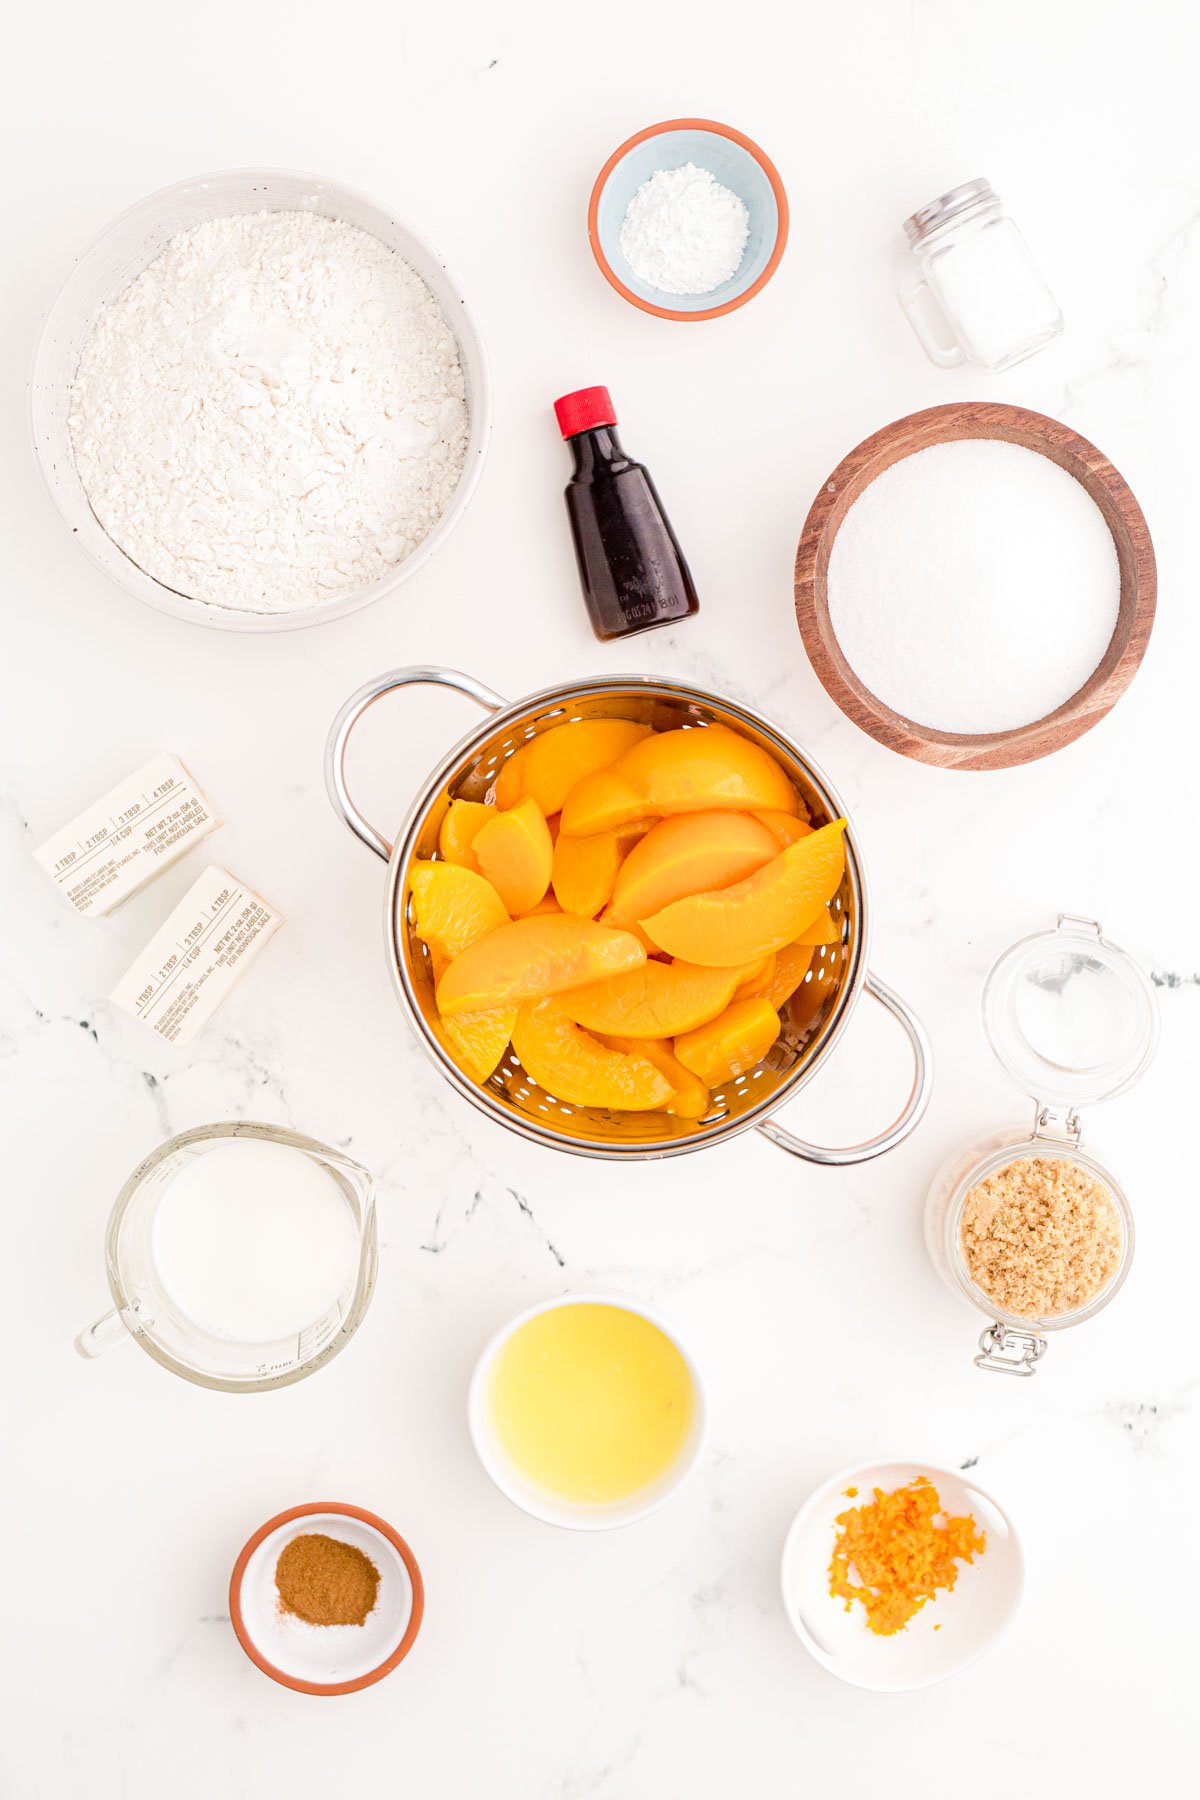 Ingredients to make peach cobbler prepped on a marble counter.